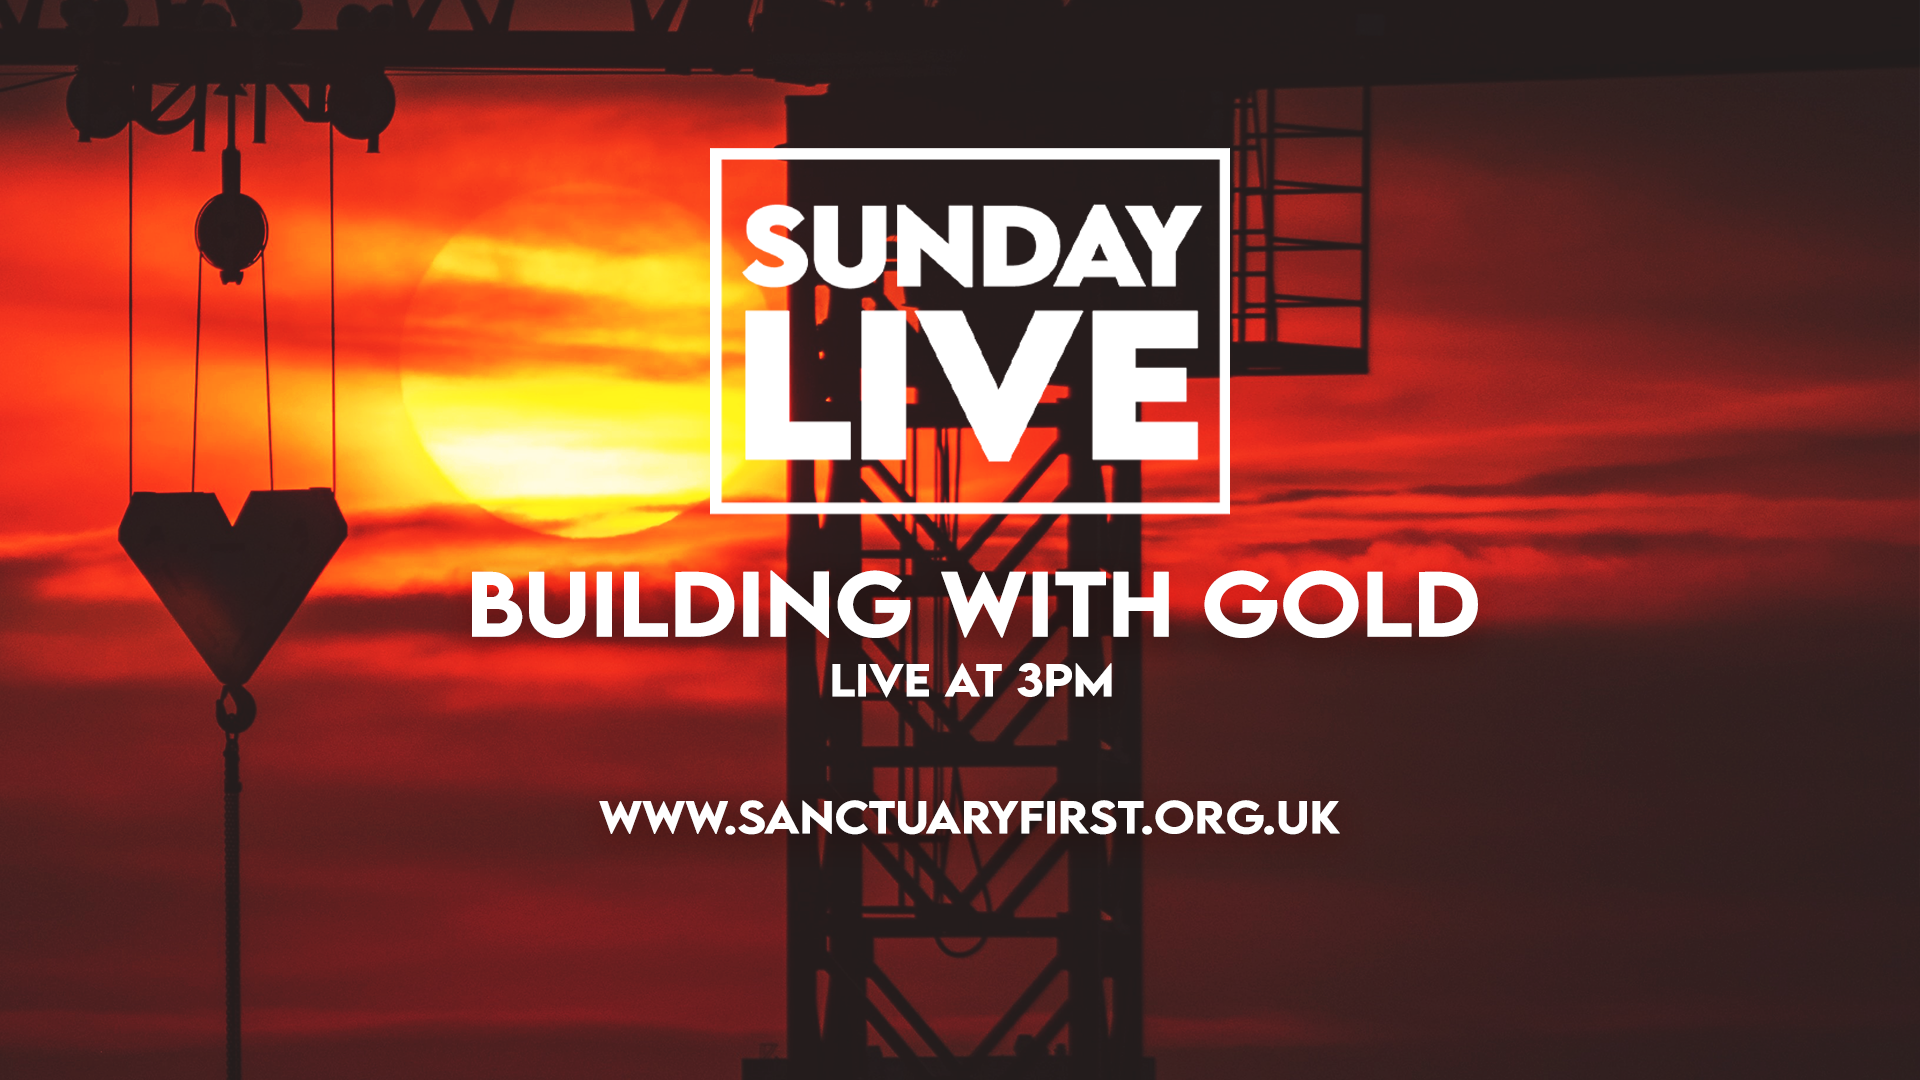 Sunday Live - Building with Gold